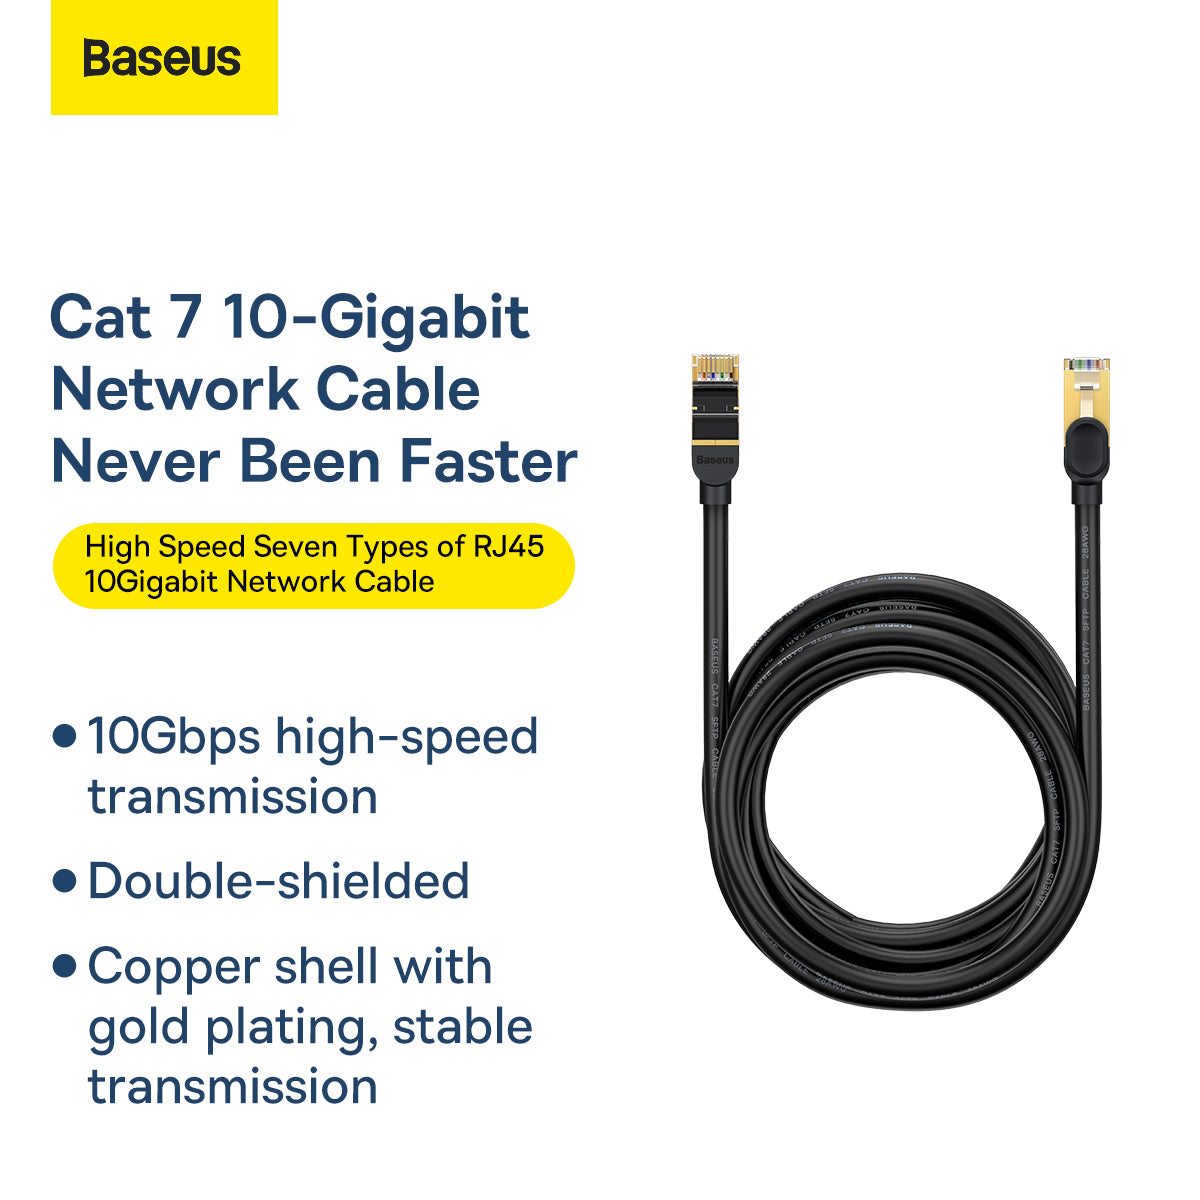 Baseus Ethernet Cable Cat 7 Cat 6 RJ45 Gigabit Network Cable Flat Cable Round Cable 1m to 30m LAN For Computer Laptop Router TV Box